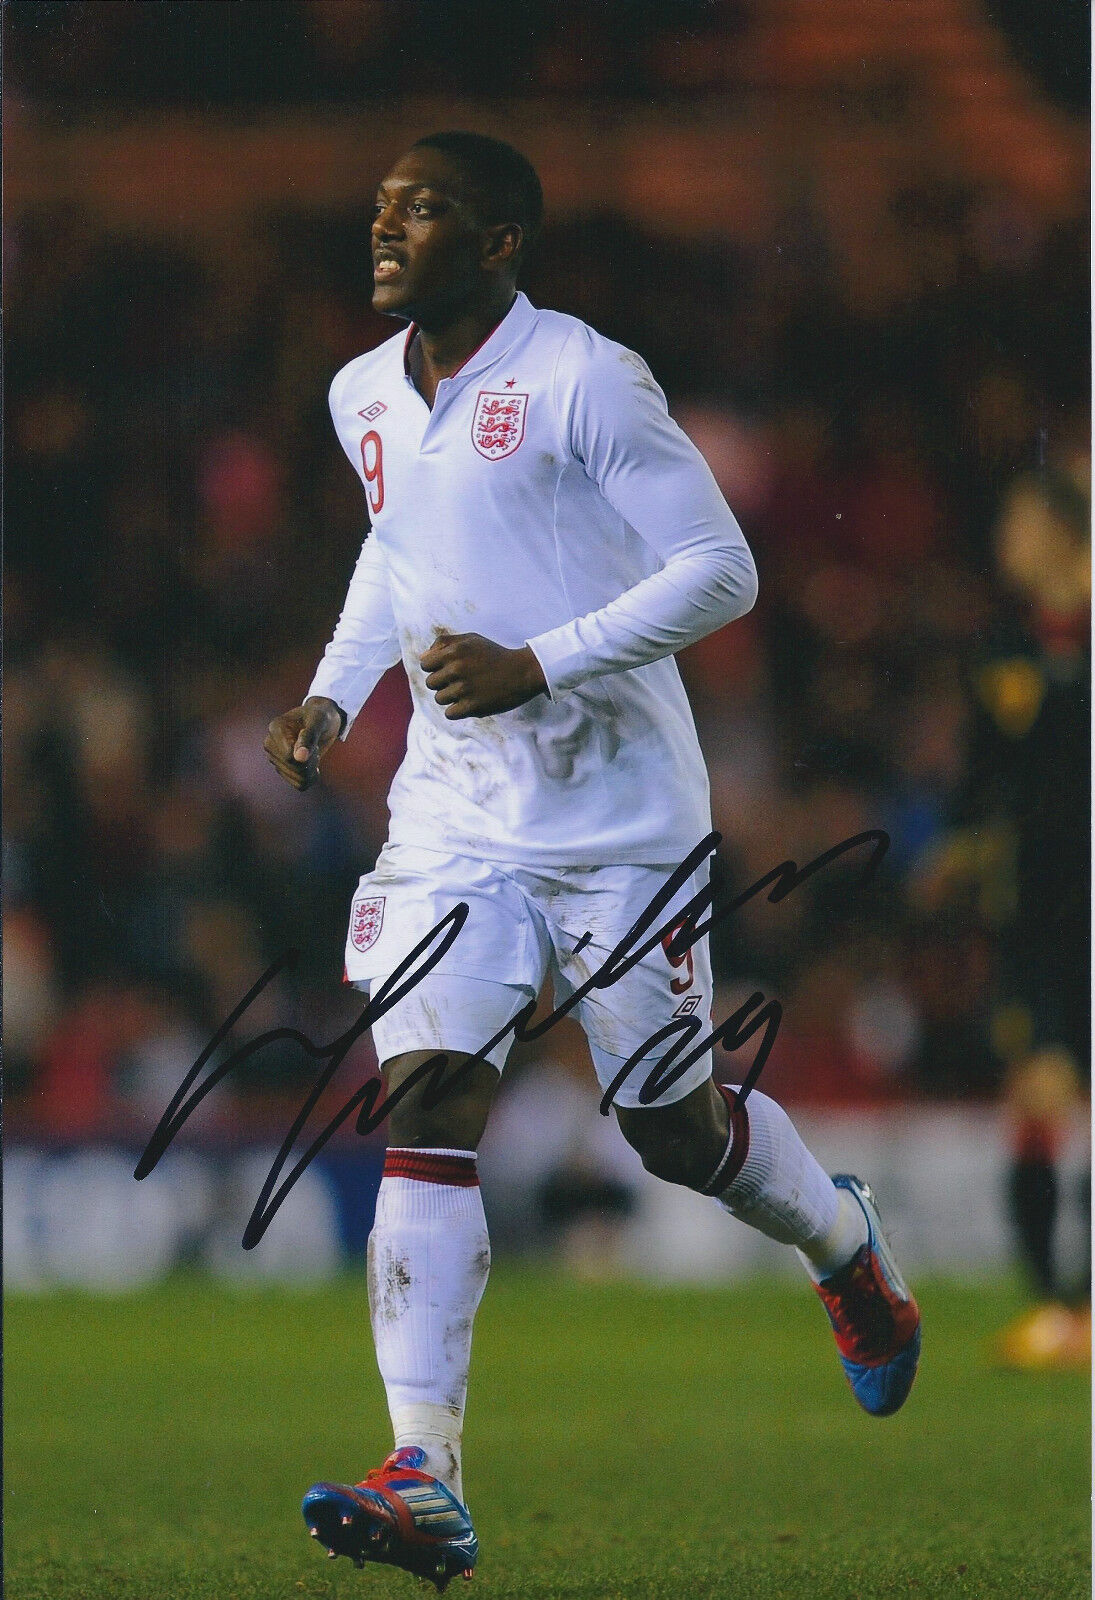 Marvin SORDELL Signed Autograph 12x8 Photo Poster painting AFTAL COA England Football Burnley